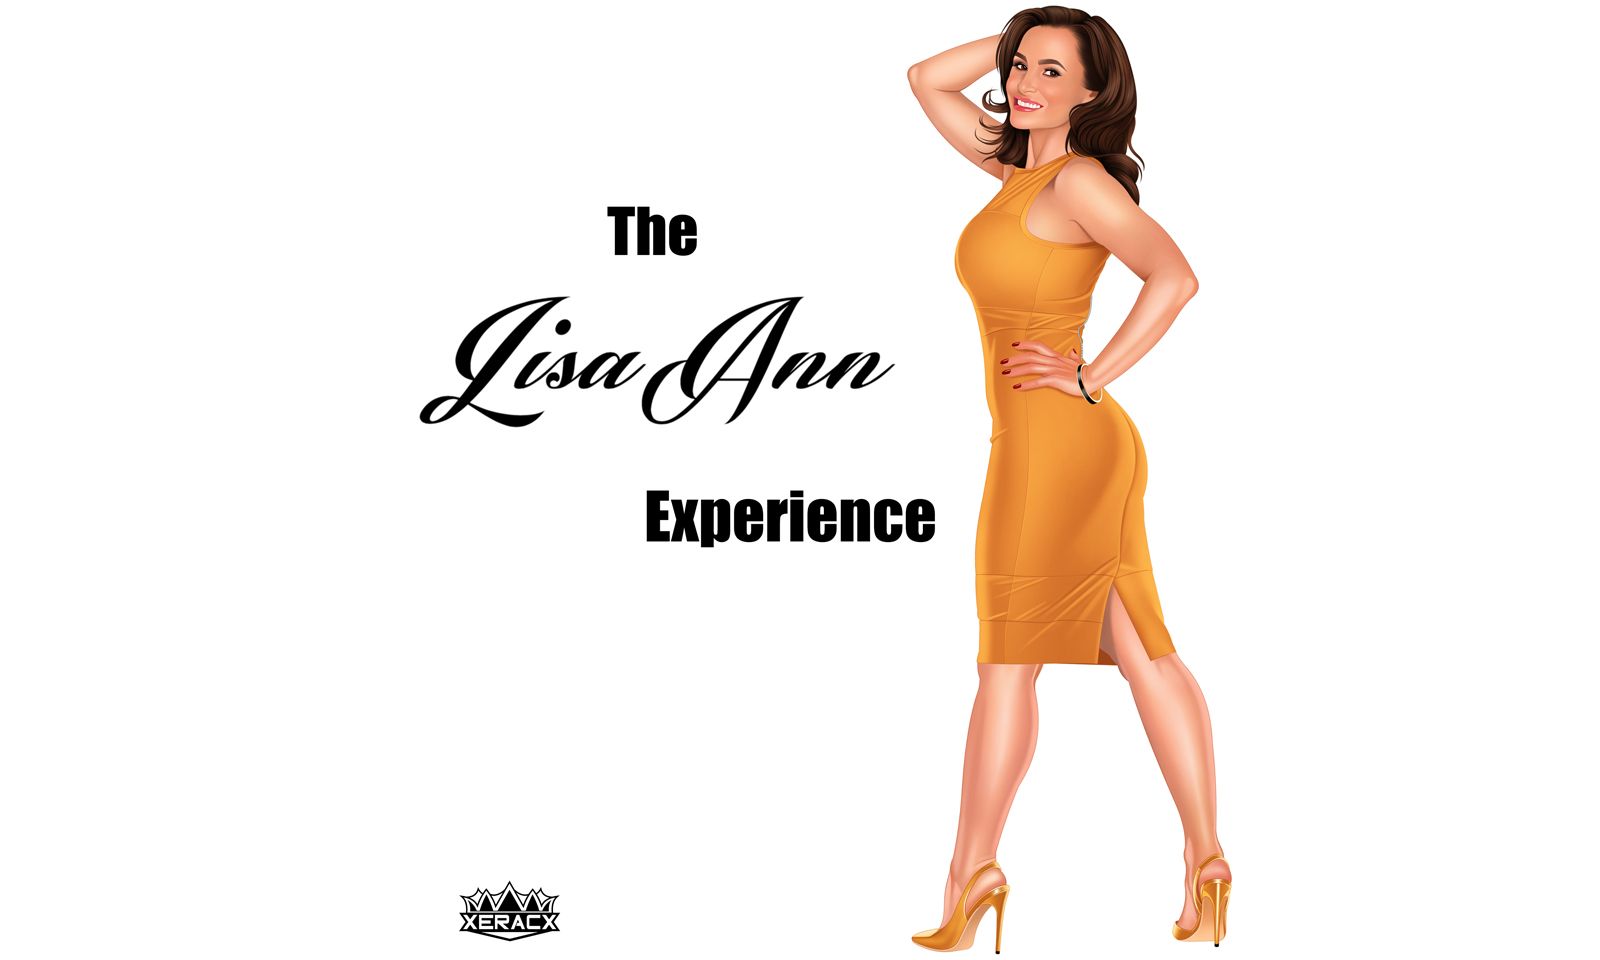 Lisa Ann Welcomes Missy Martinez to 'The Lisa Ann Experience'